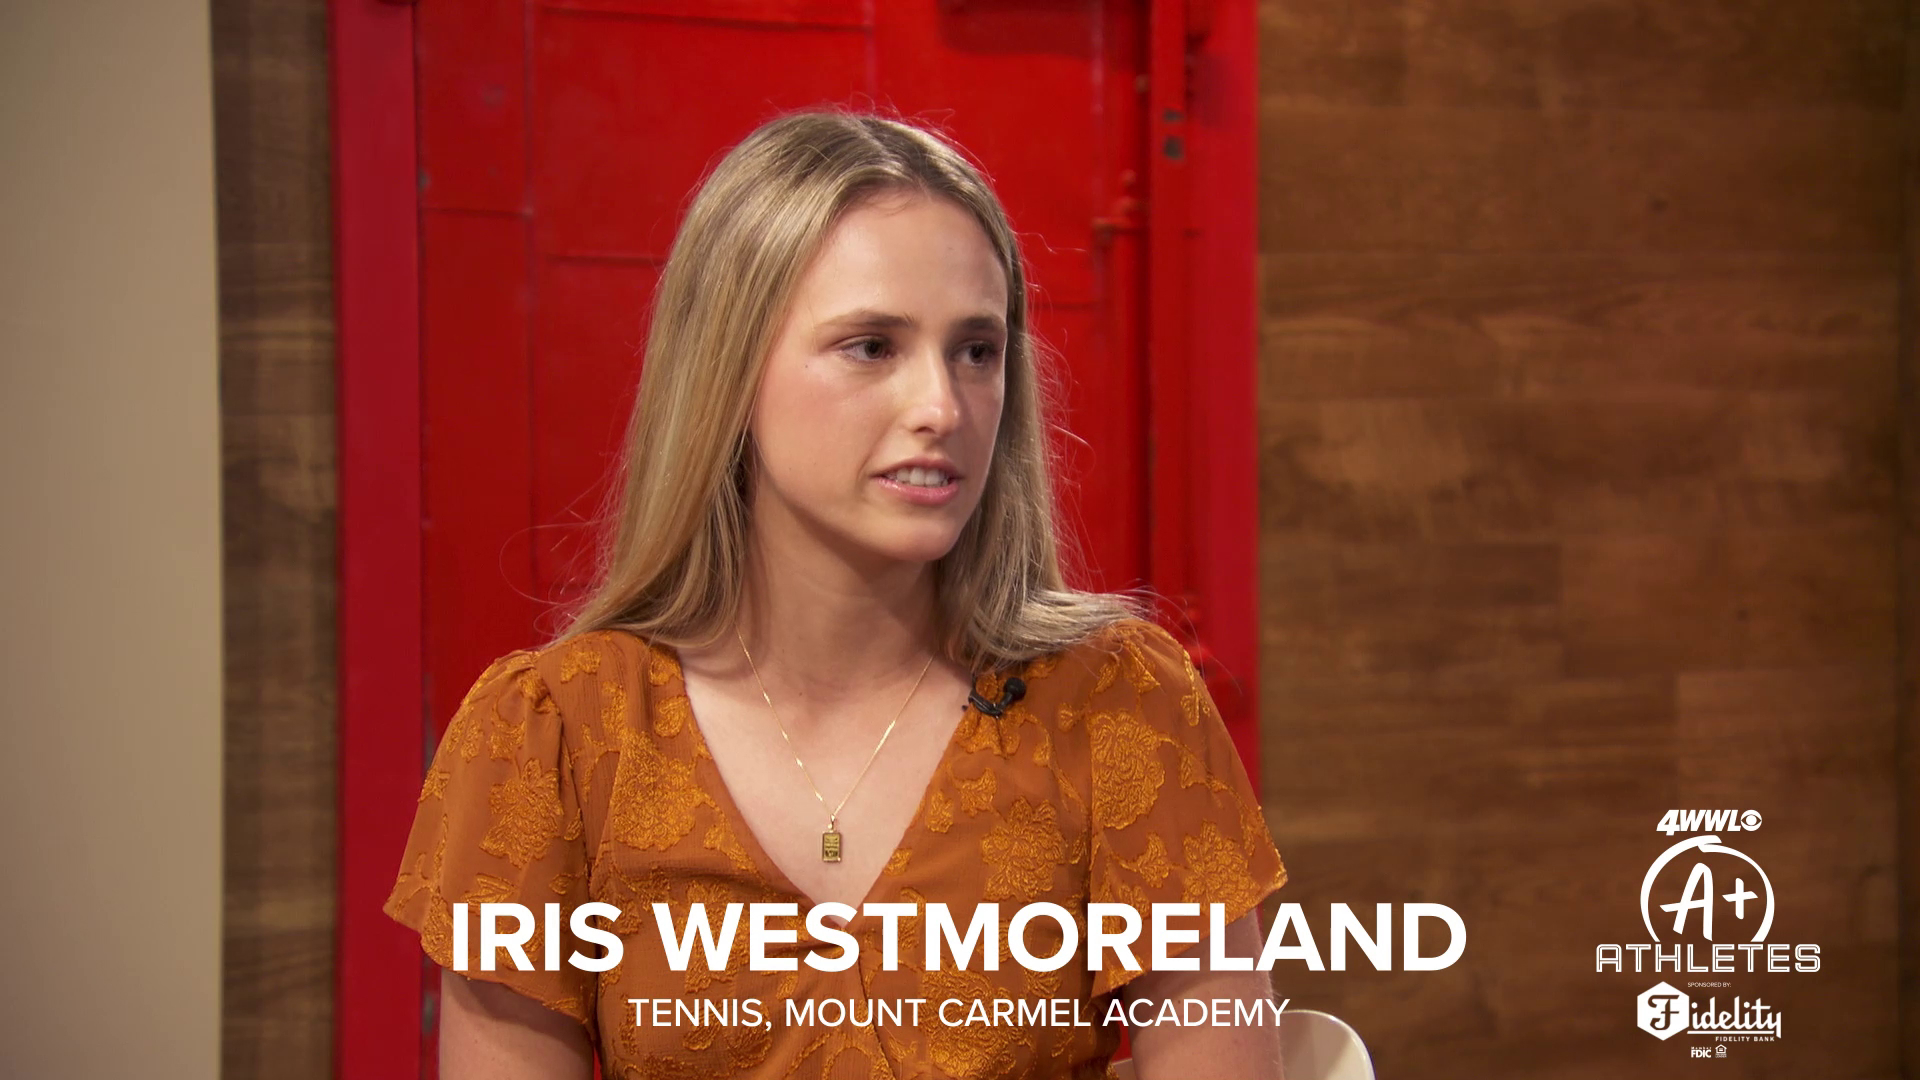 WWL-TV is honoring athletes who excel on and off the field, like Mount Carmel Academy's Iris Westmoreland